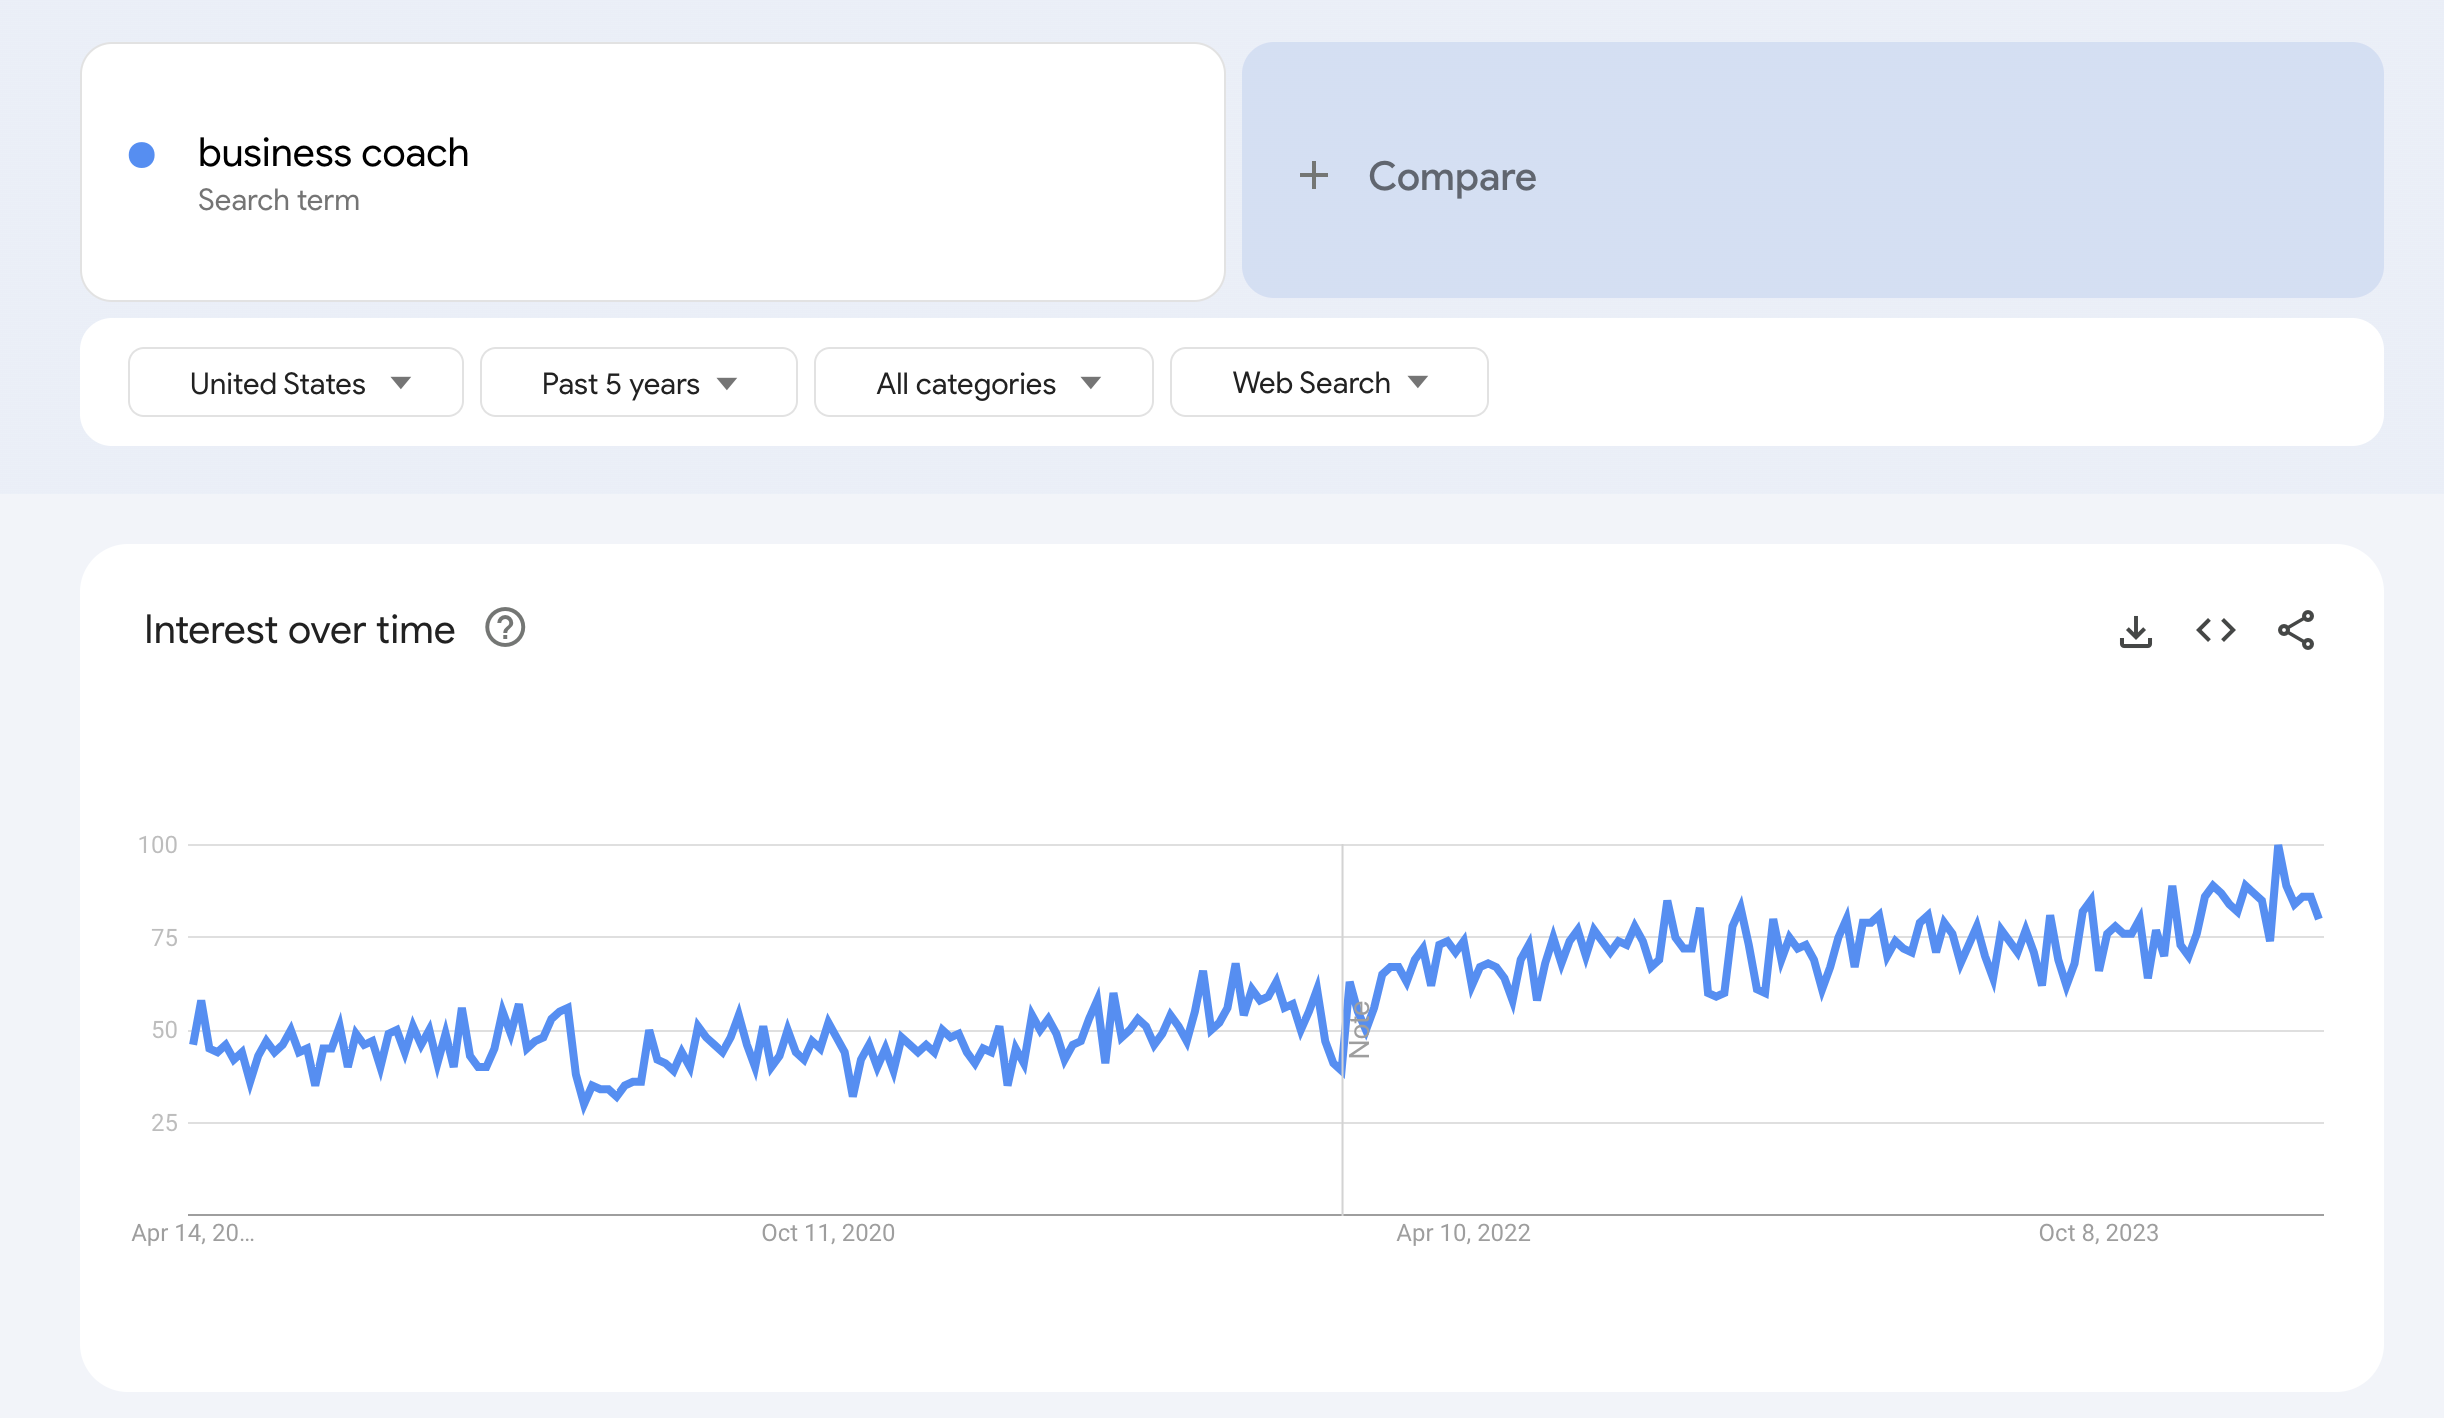 Google trends data for business coach